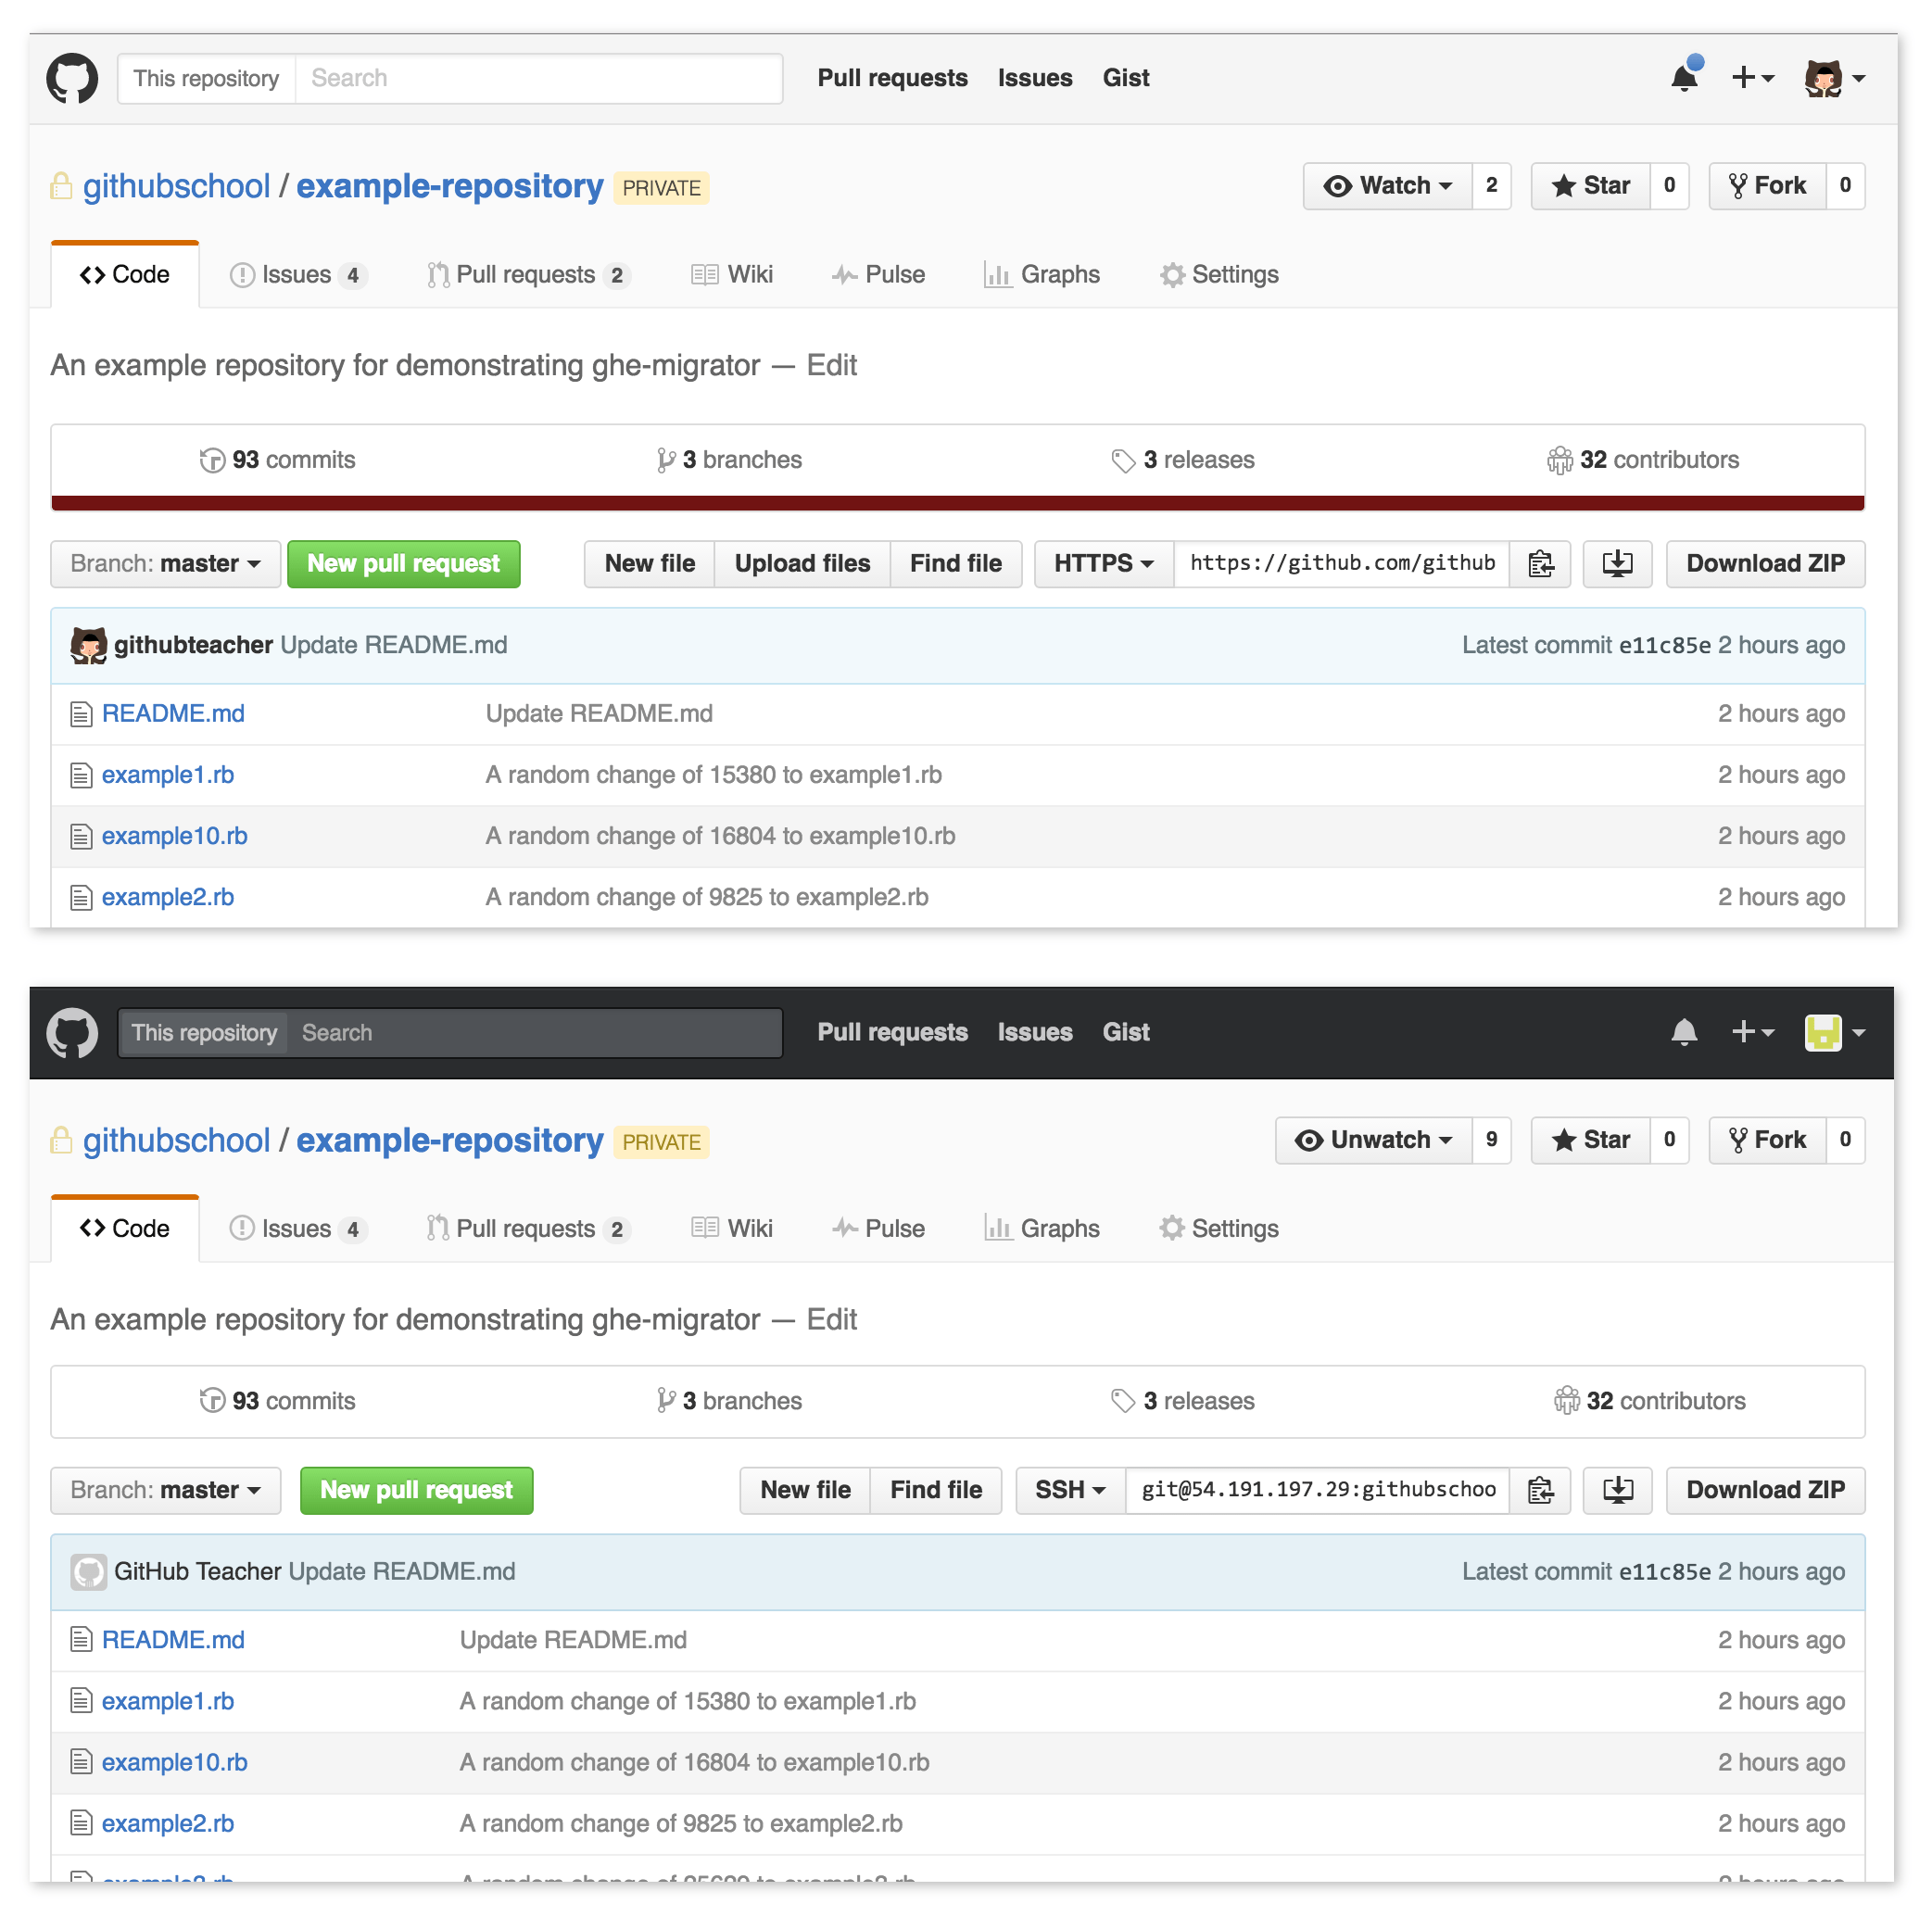 Completed migration to GitHub Enterprise